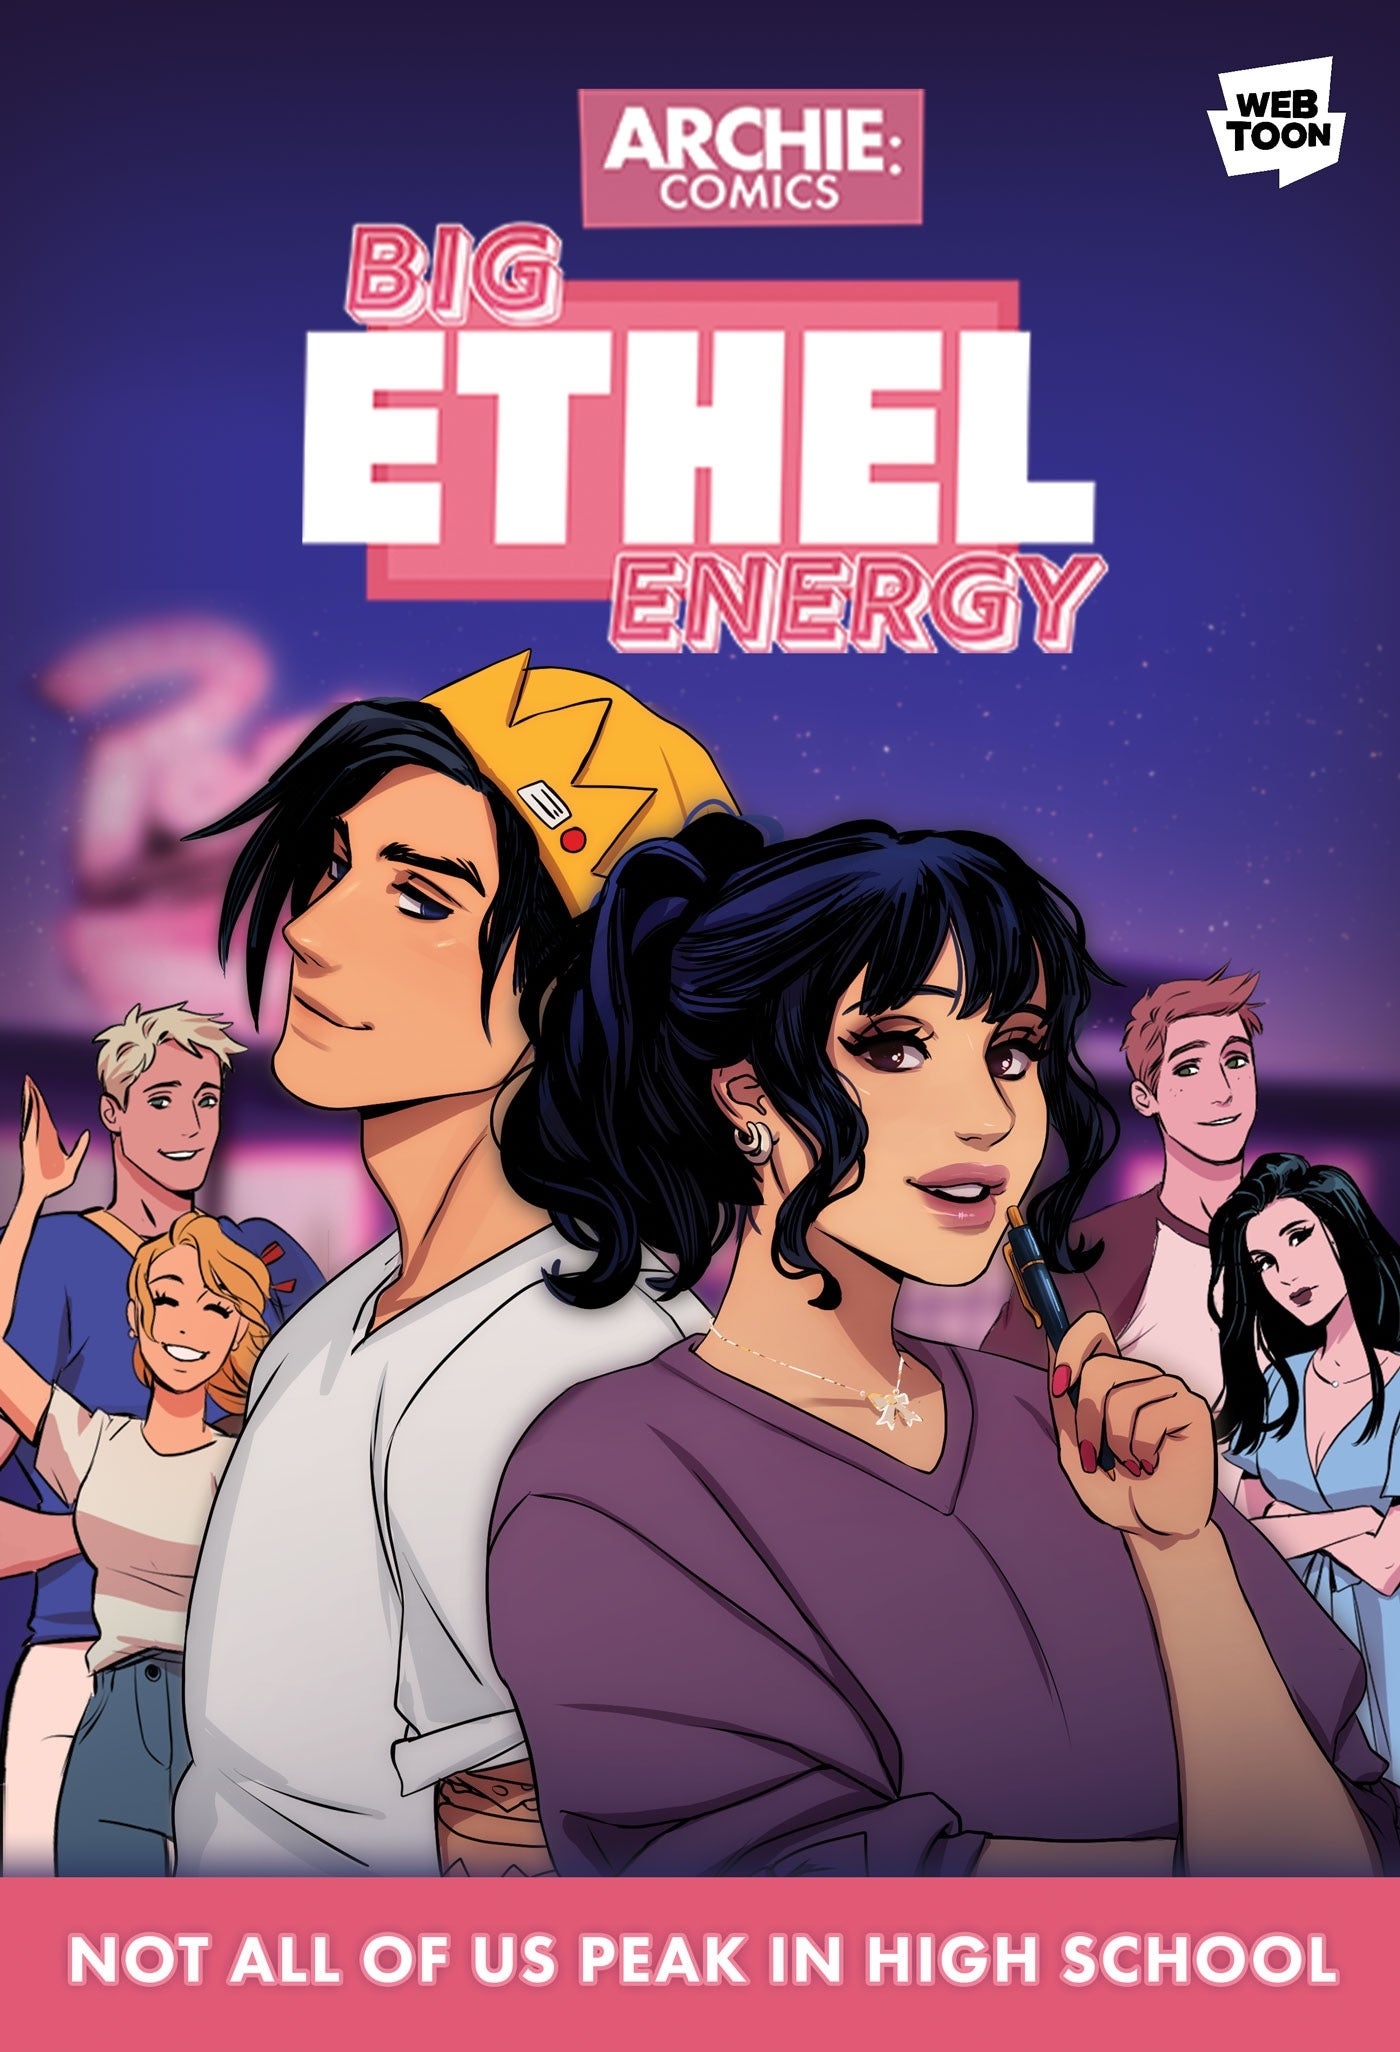 Cover of Big Ethel Energy featuring Ethel and Jughead upfront and the rest of the Archie cast in the back